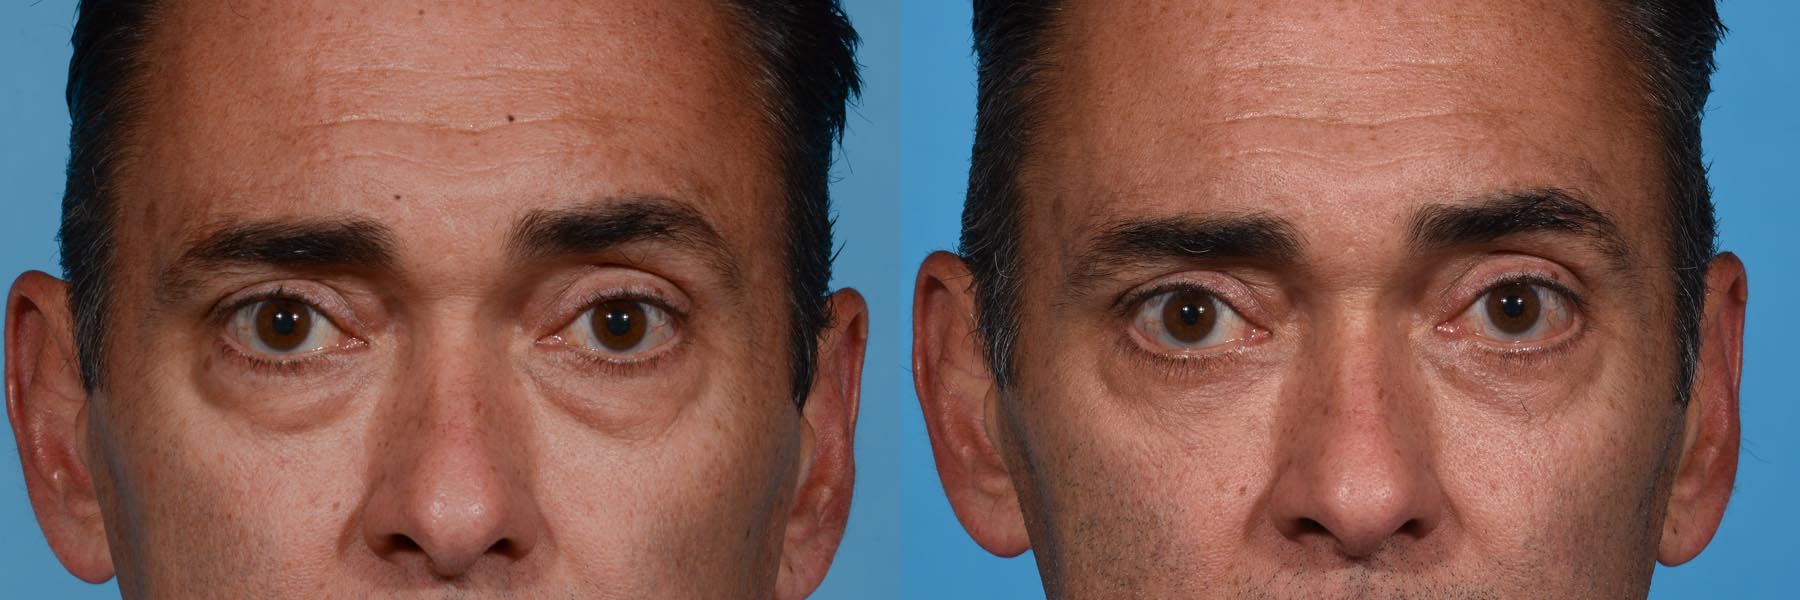 Lower Eyelid Lift Before and After Photo by Sculpt Aesthetic Center in Frisco, TX